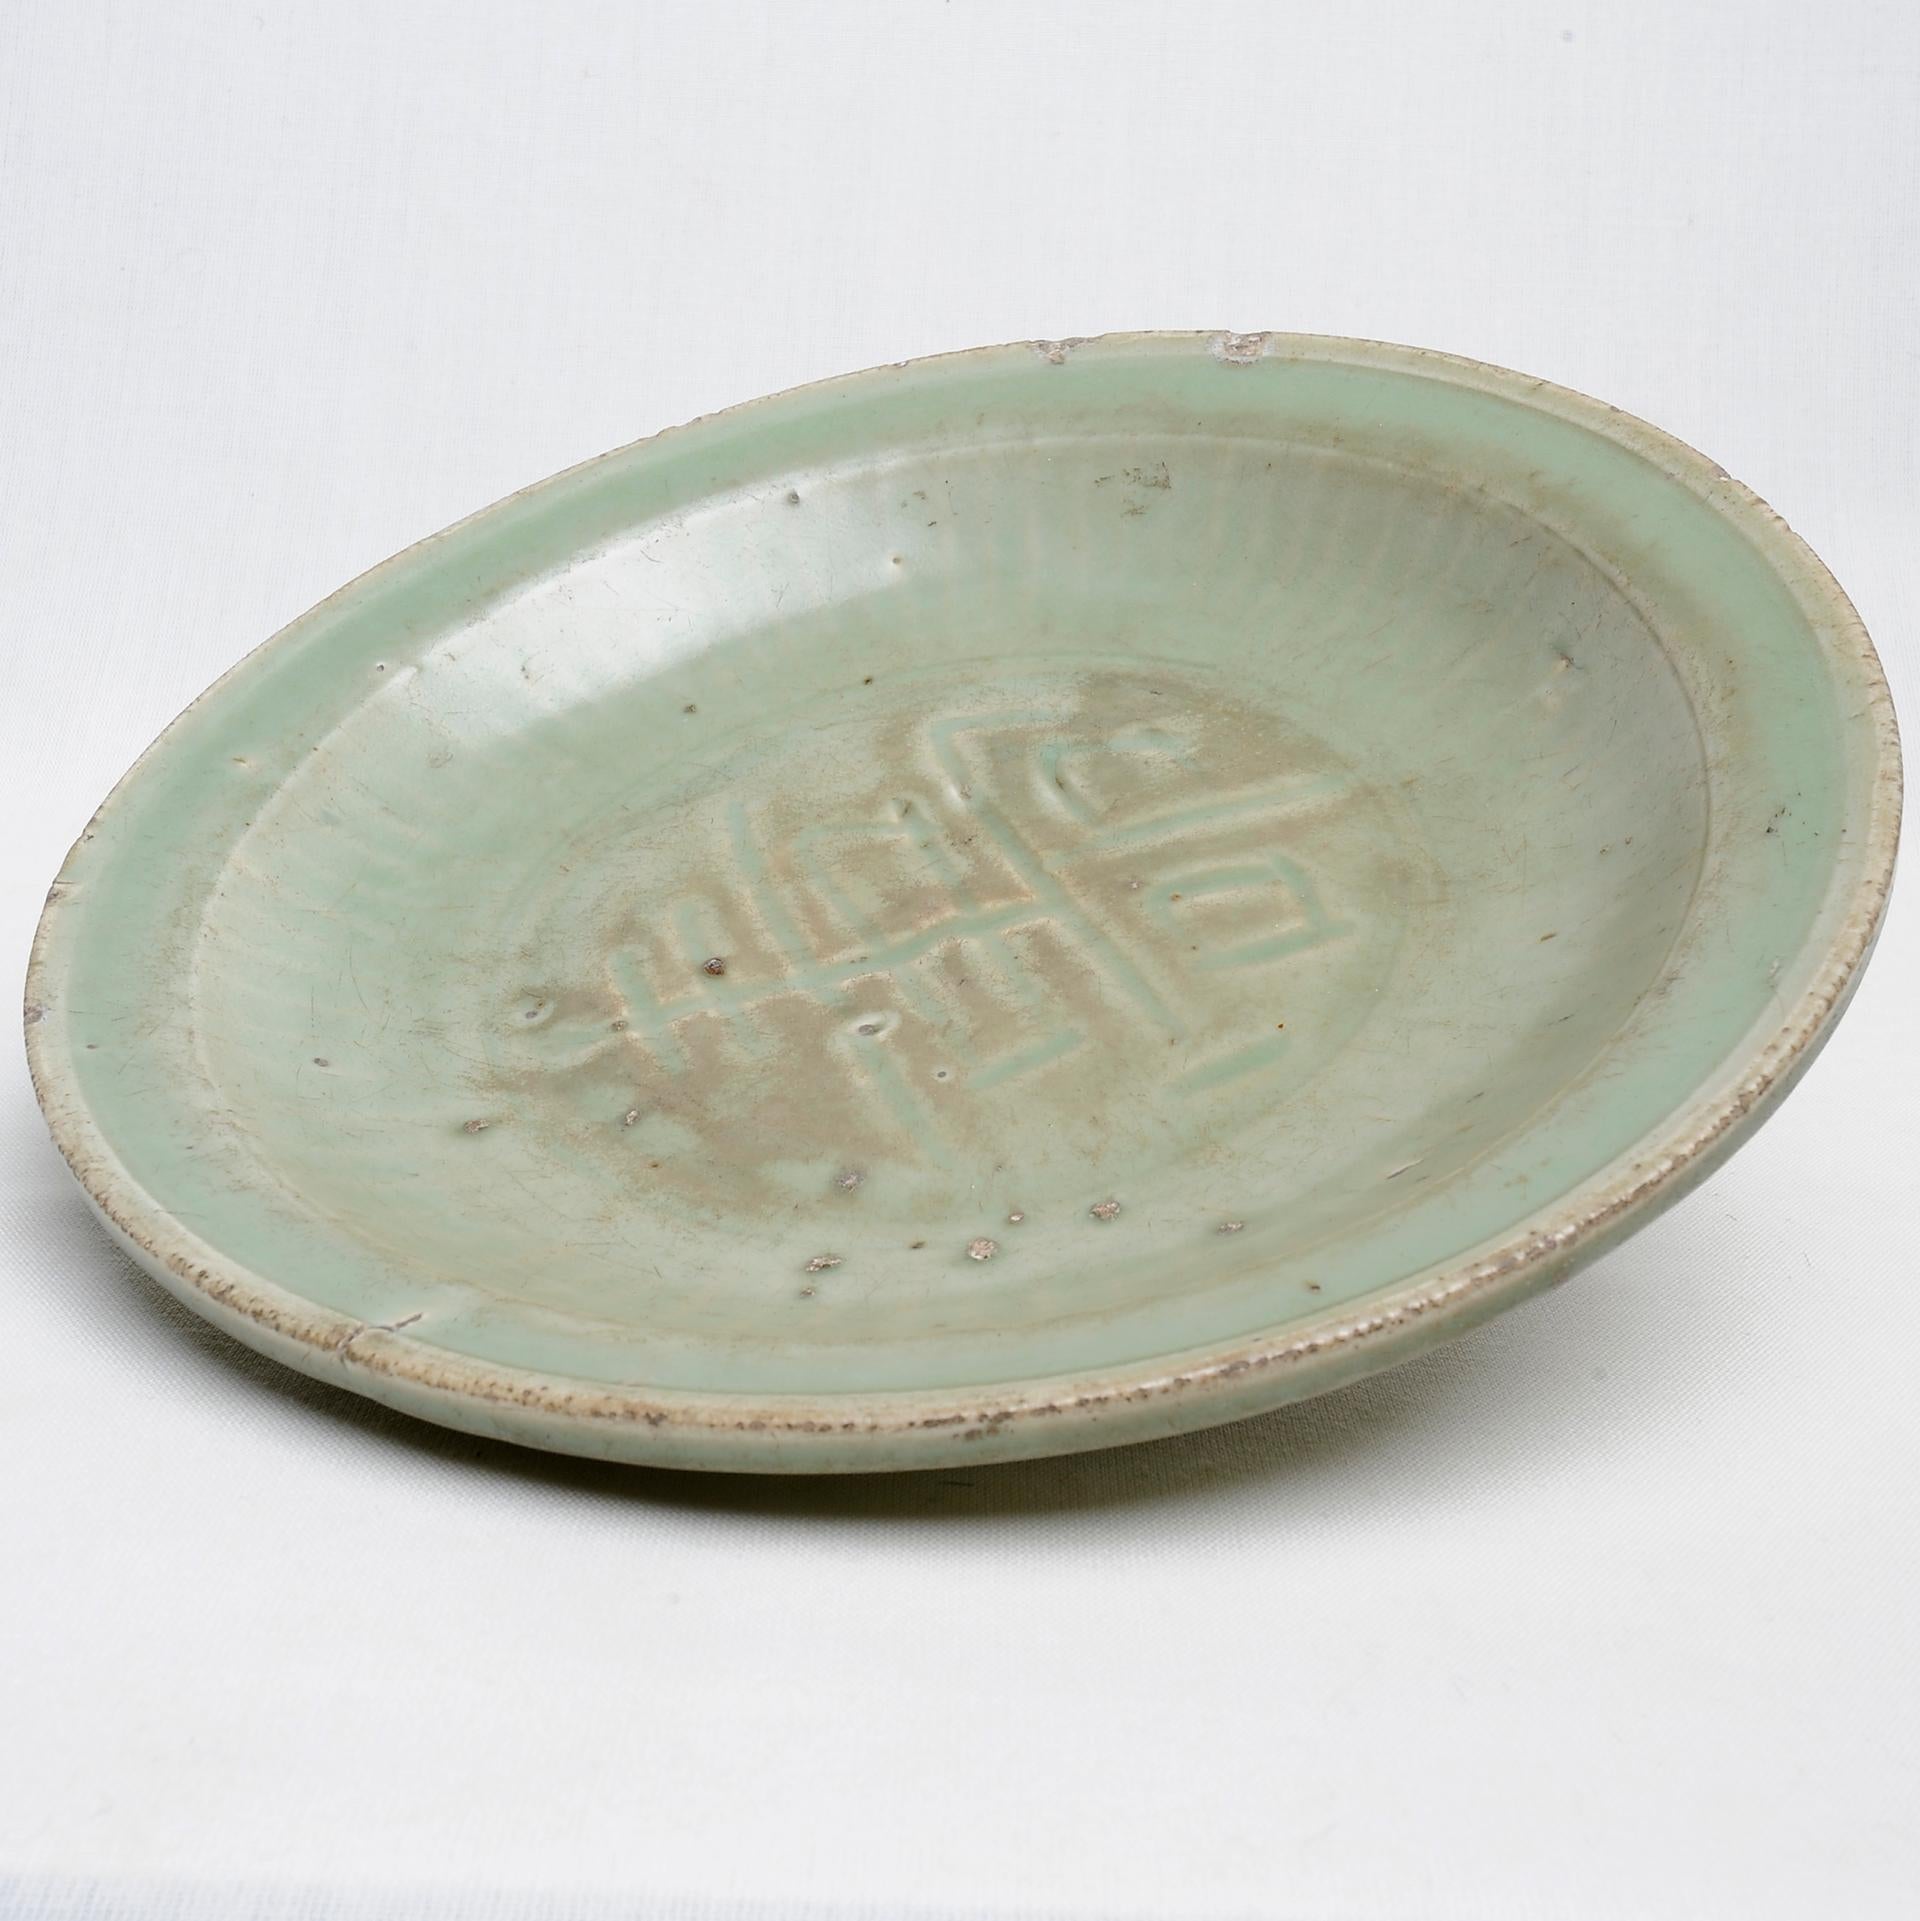 Large antique Celadon dish with ideograms from my private collection: collected about 35 years ago and never exhibited to the public. Look to other items of my entire collection, under my name Enrica Pasino.
Now I want to close my activities,